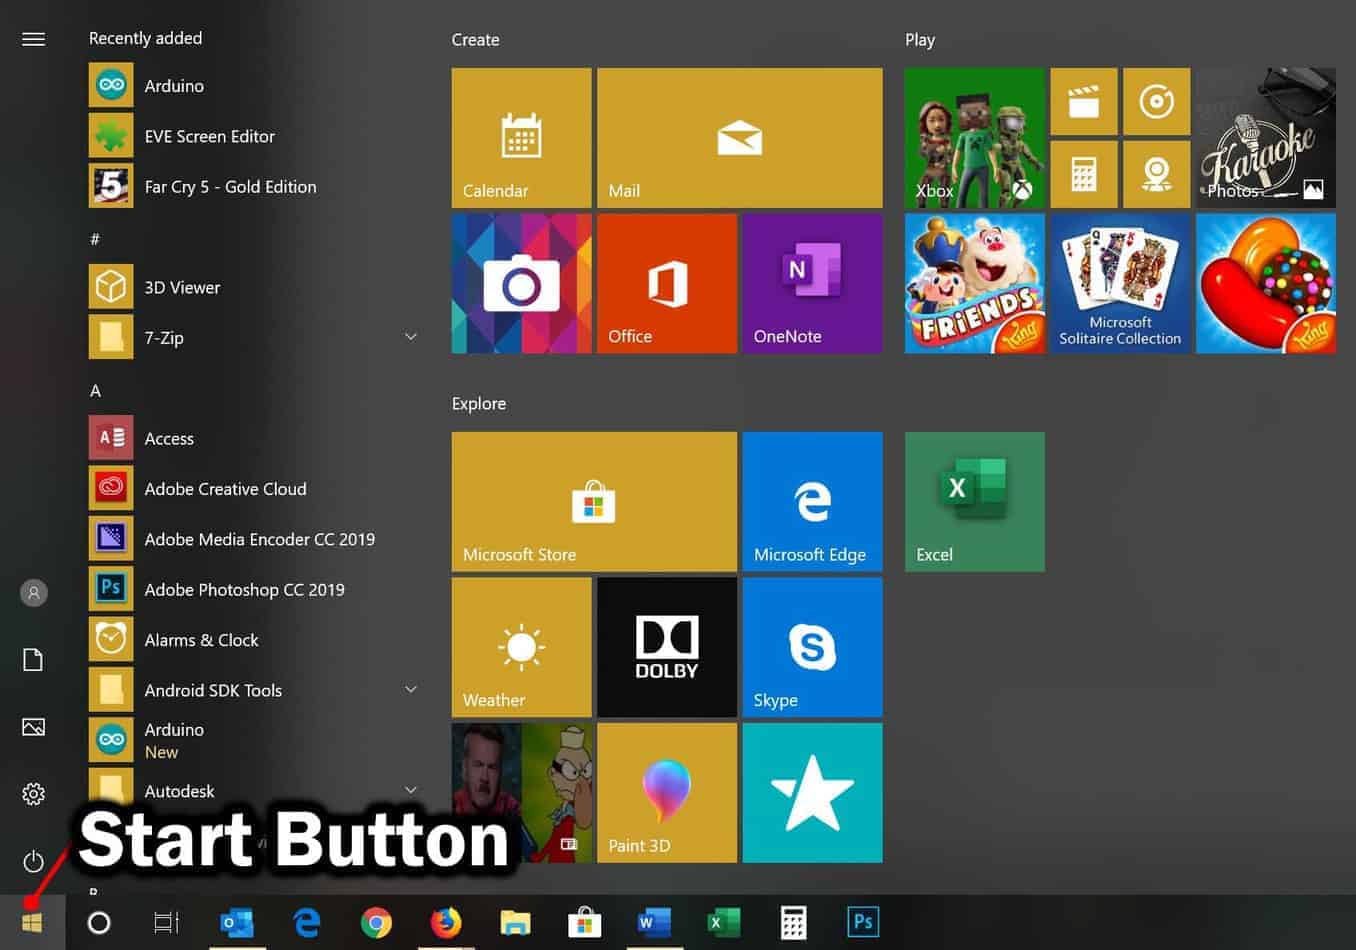 Open the Start menu by clicking on the Windows icon in the bottom left corner of the screen.
Select Settings from the menu.